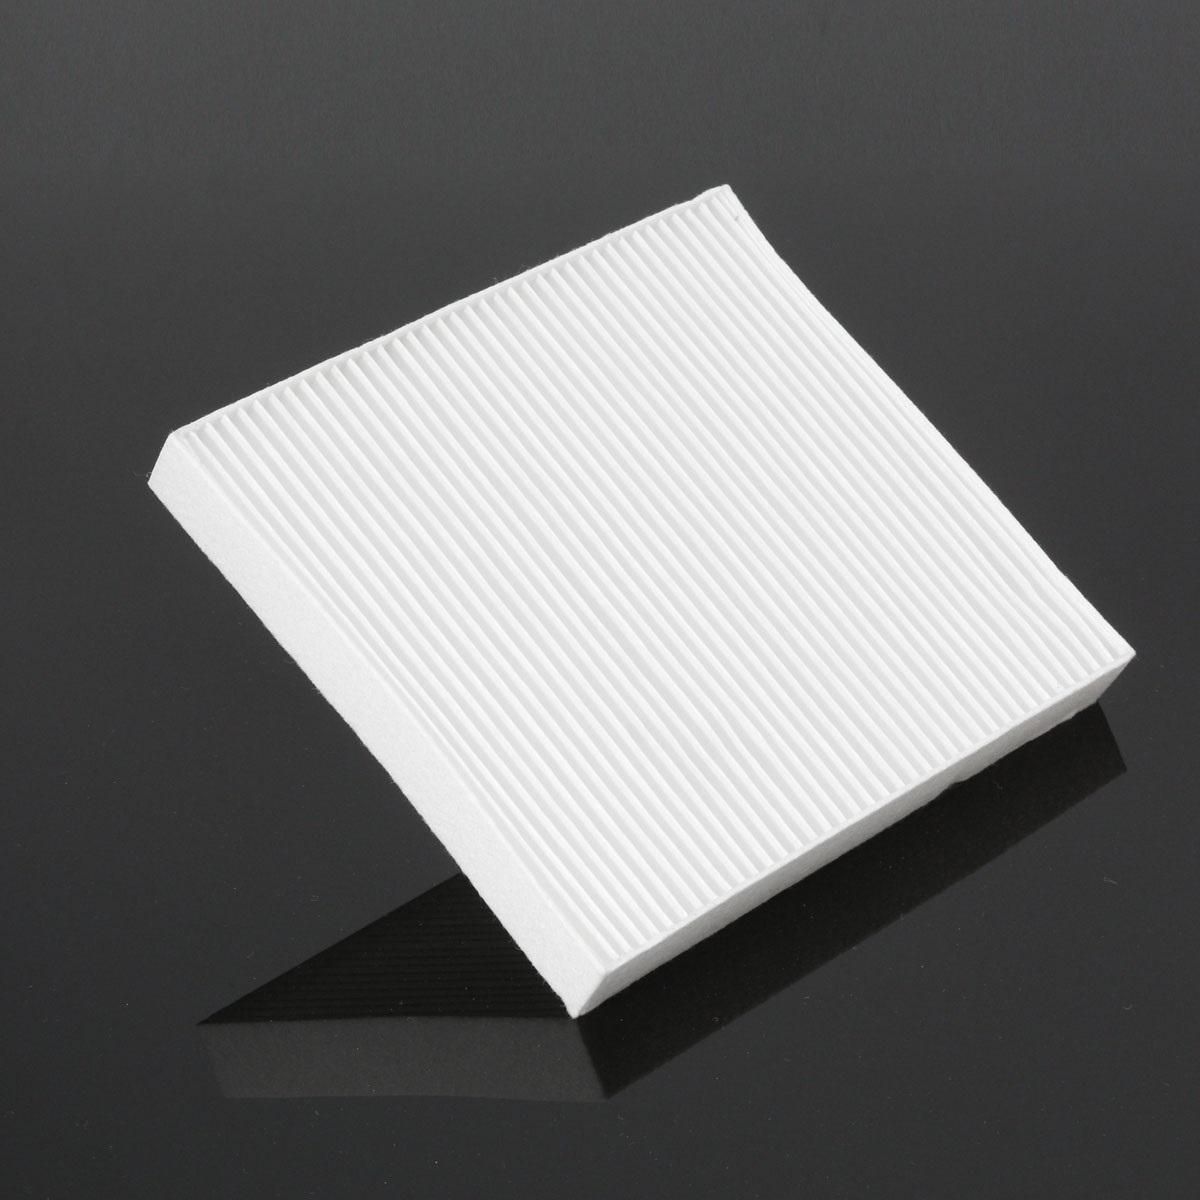 Yulicoauto AIR COND CABIN AIR FILTER for Honda Jazz '08-'17/City '09-'13